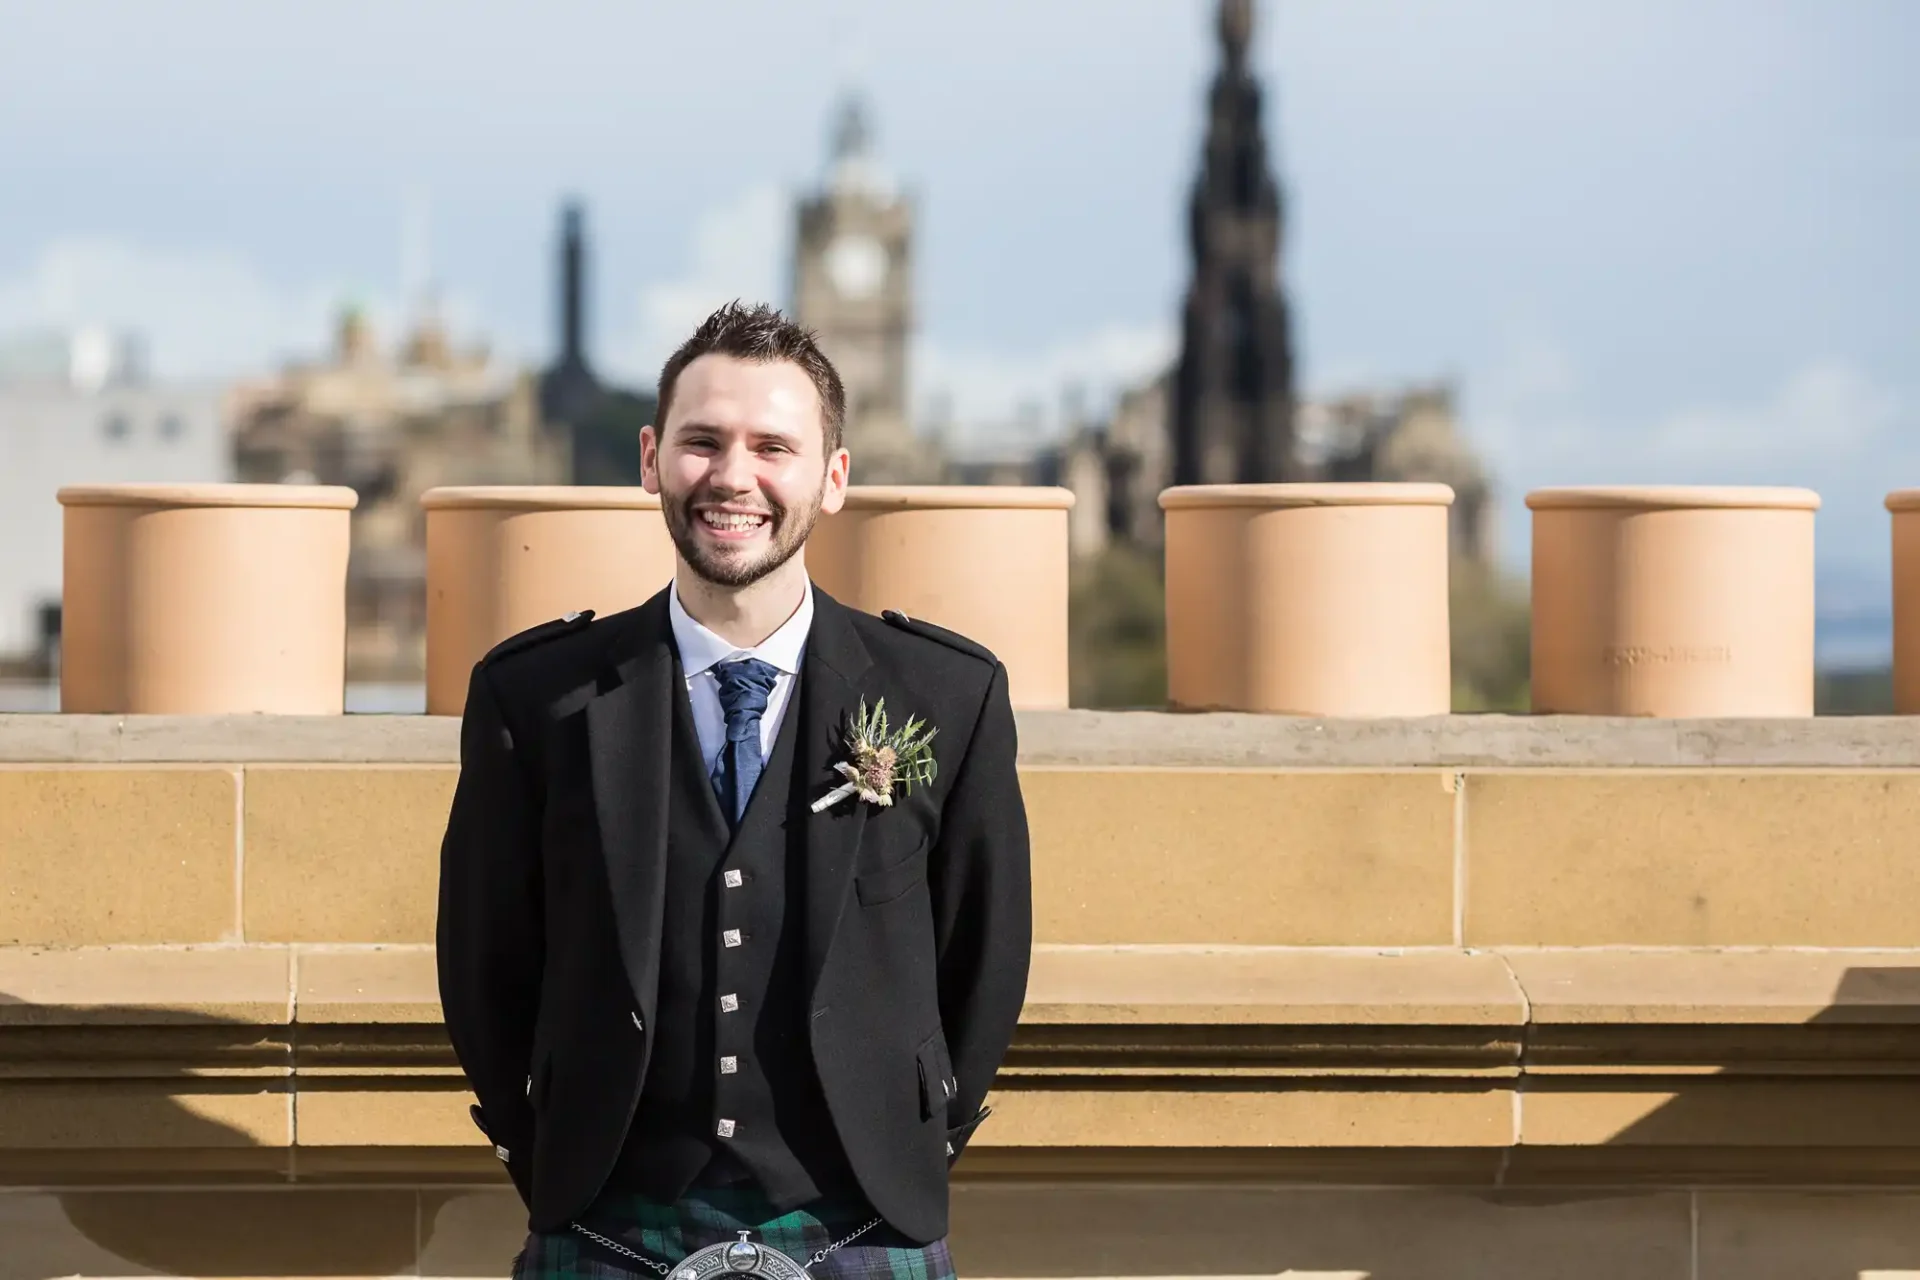 A man in a kilt and black jacket smiling, standing on a balcony with large pots and a cityscape with monuments in the background.